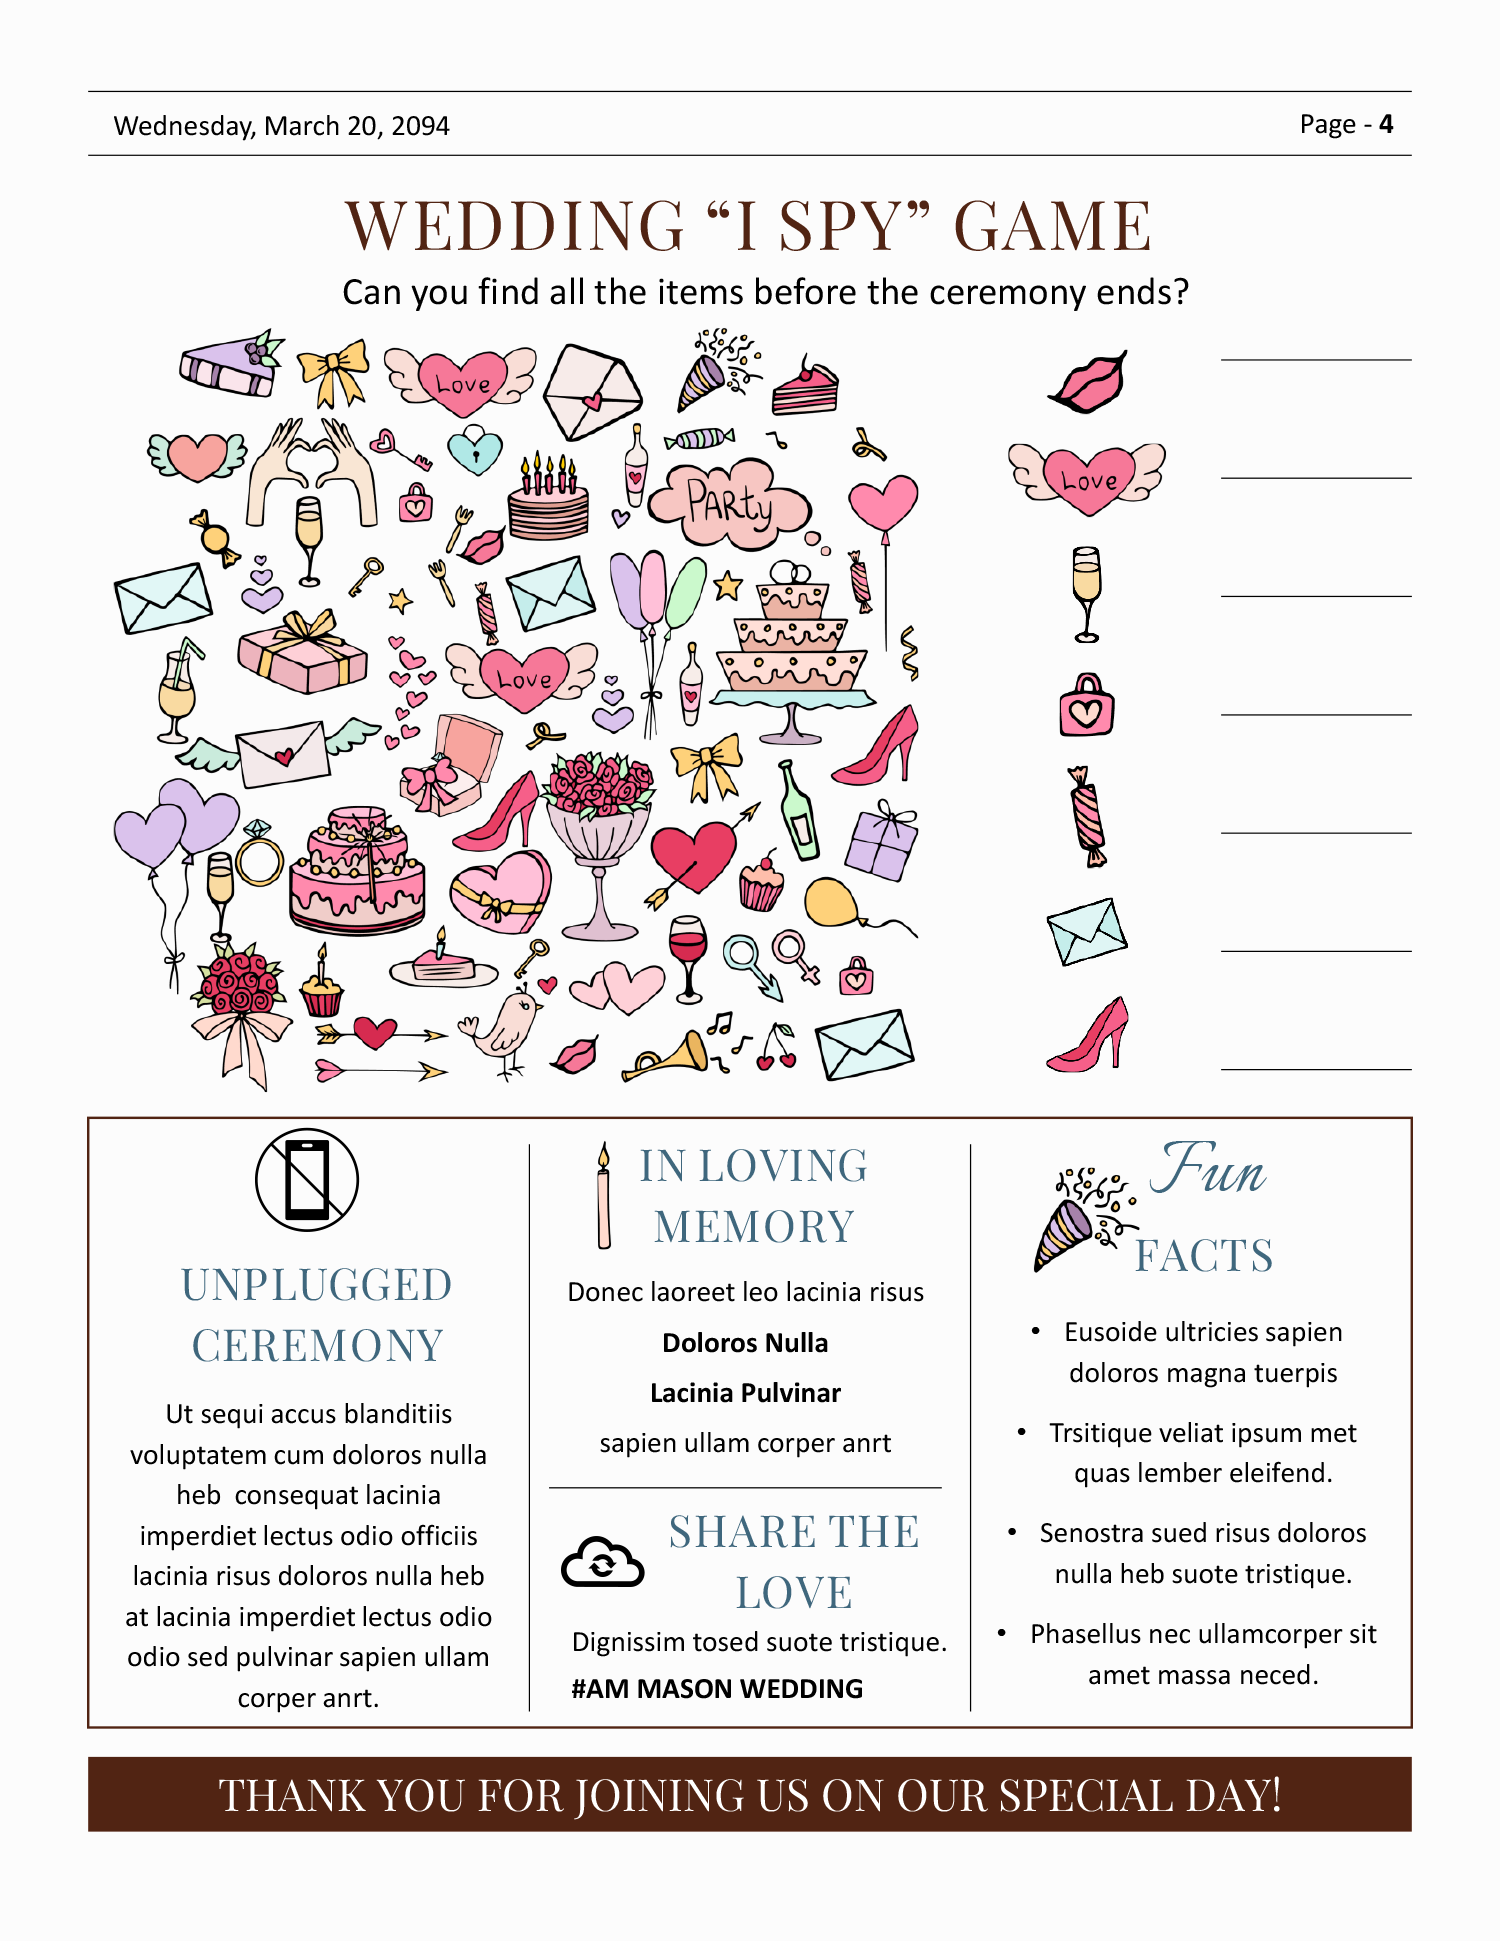 8.5x11 US Letter Wedding Newspaper Template - Page 04